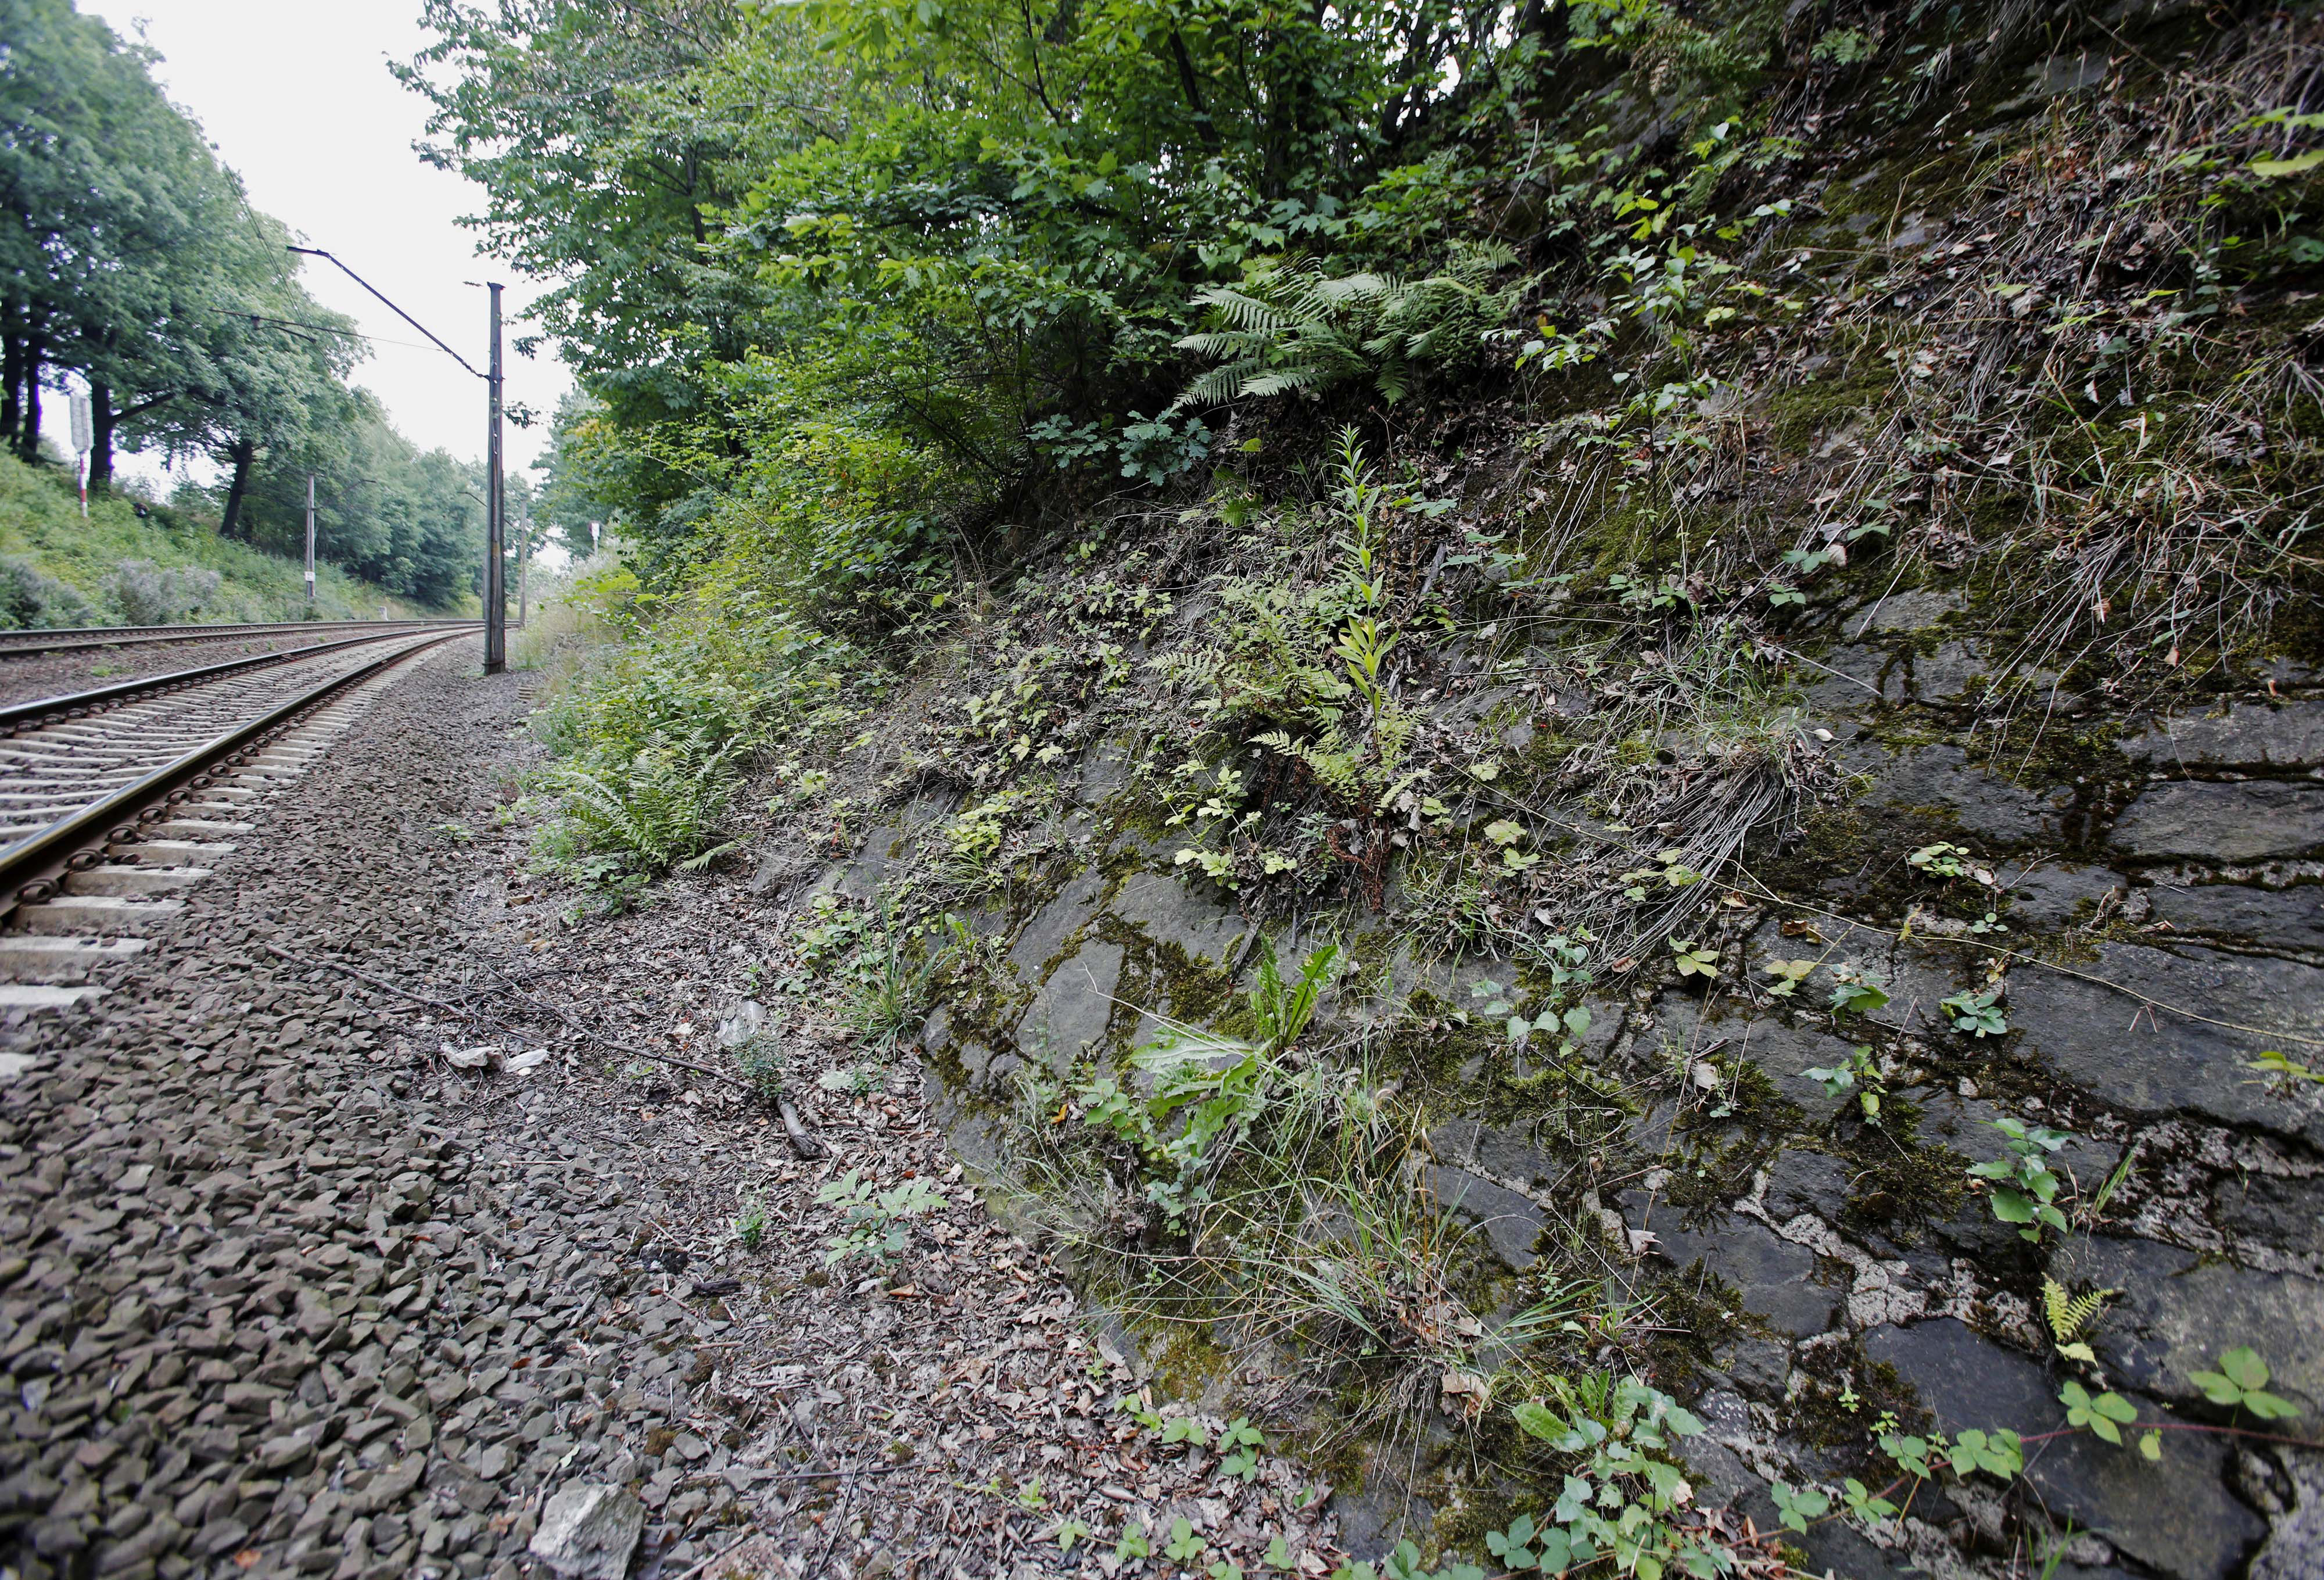 The potential site where a Nazi gold train is believed to be hidden, near the city of Walbrzych, Poland, on Aug. 28, 2015. (AP)